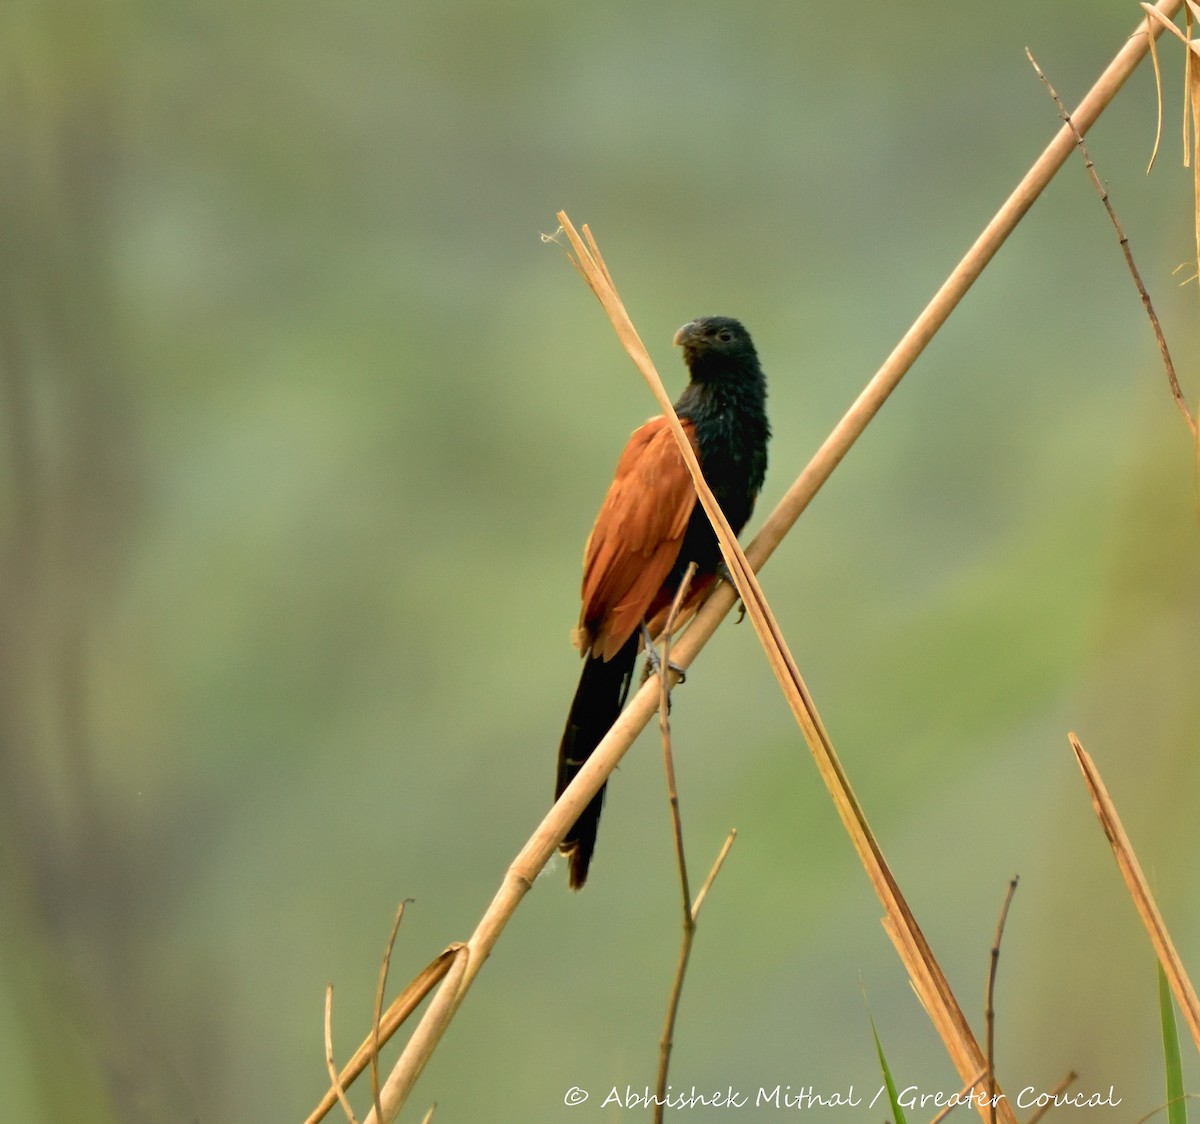 Greater Coucal - Abhishek Mithal